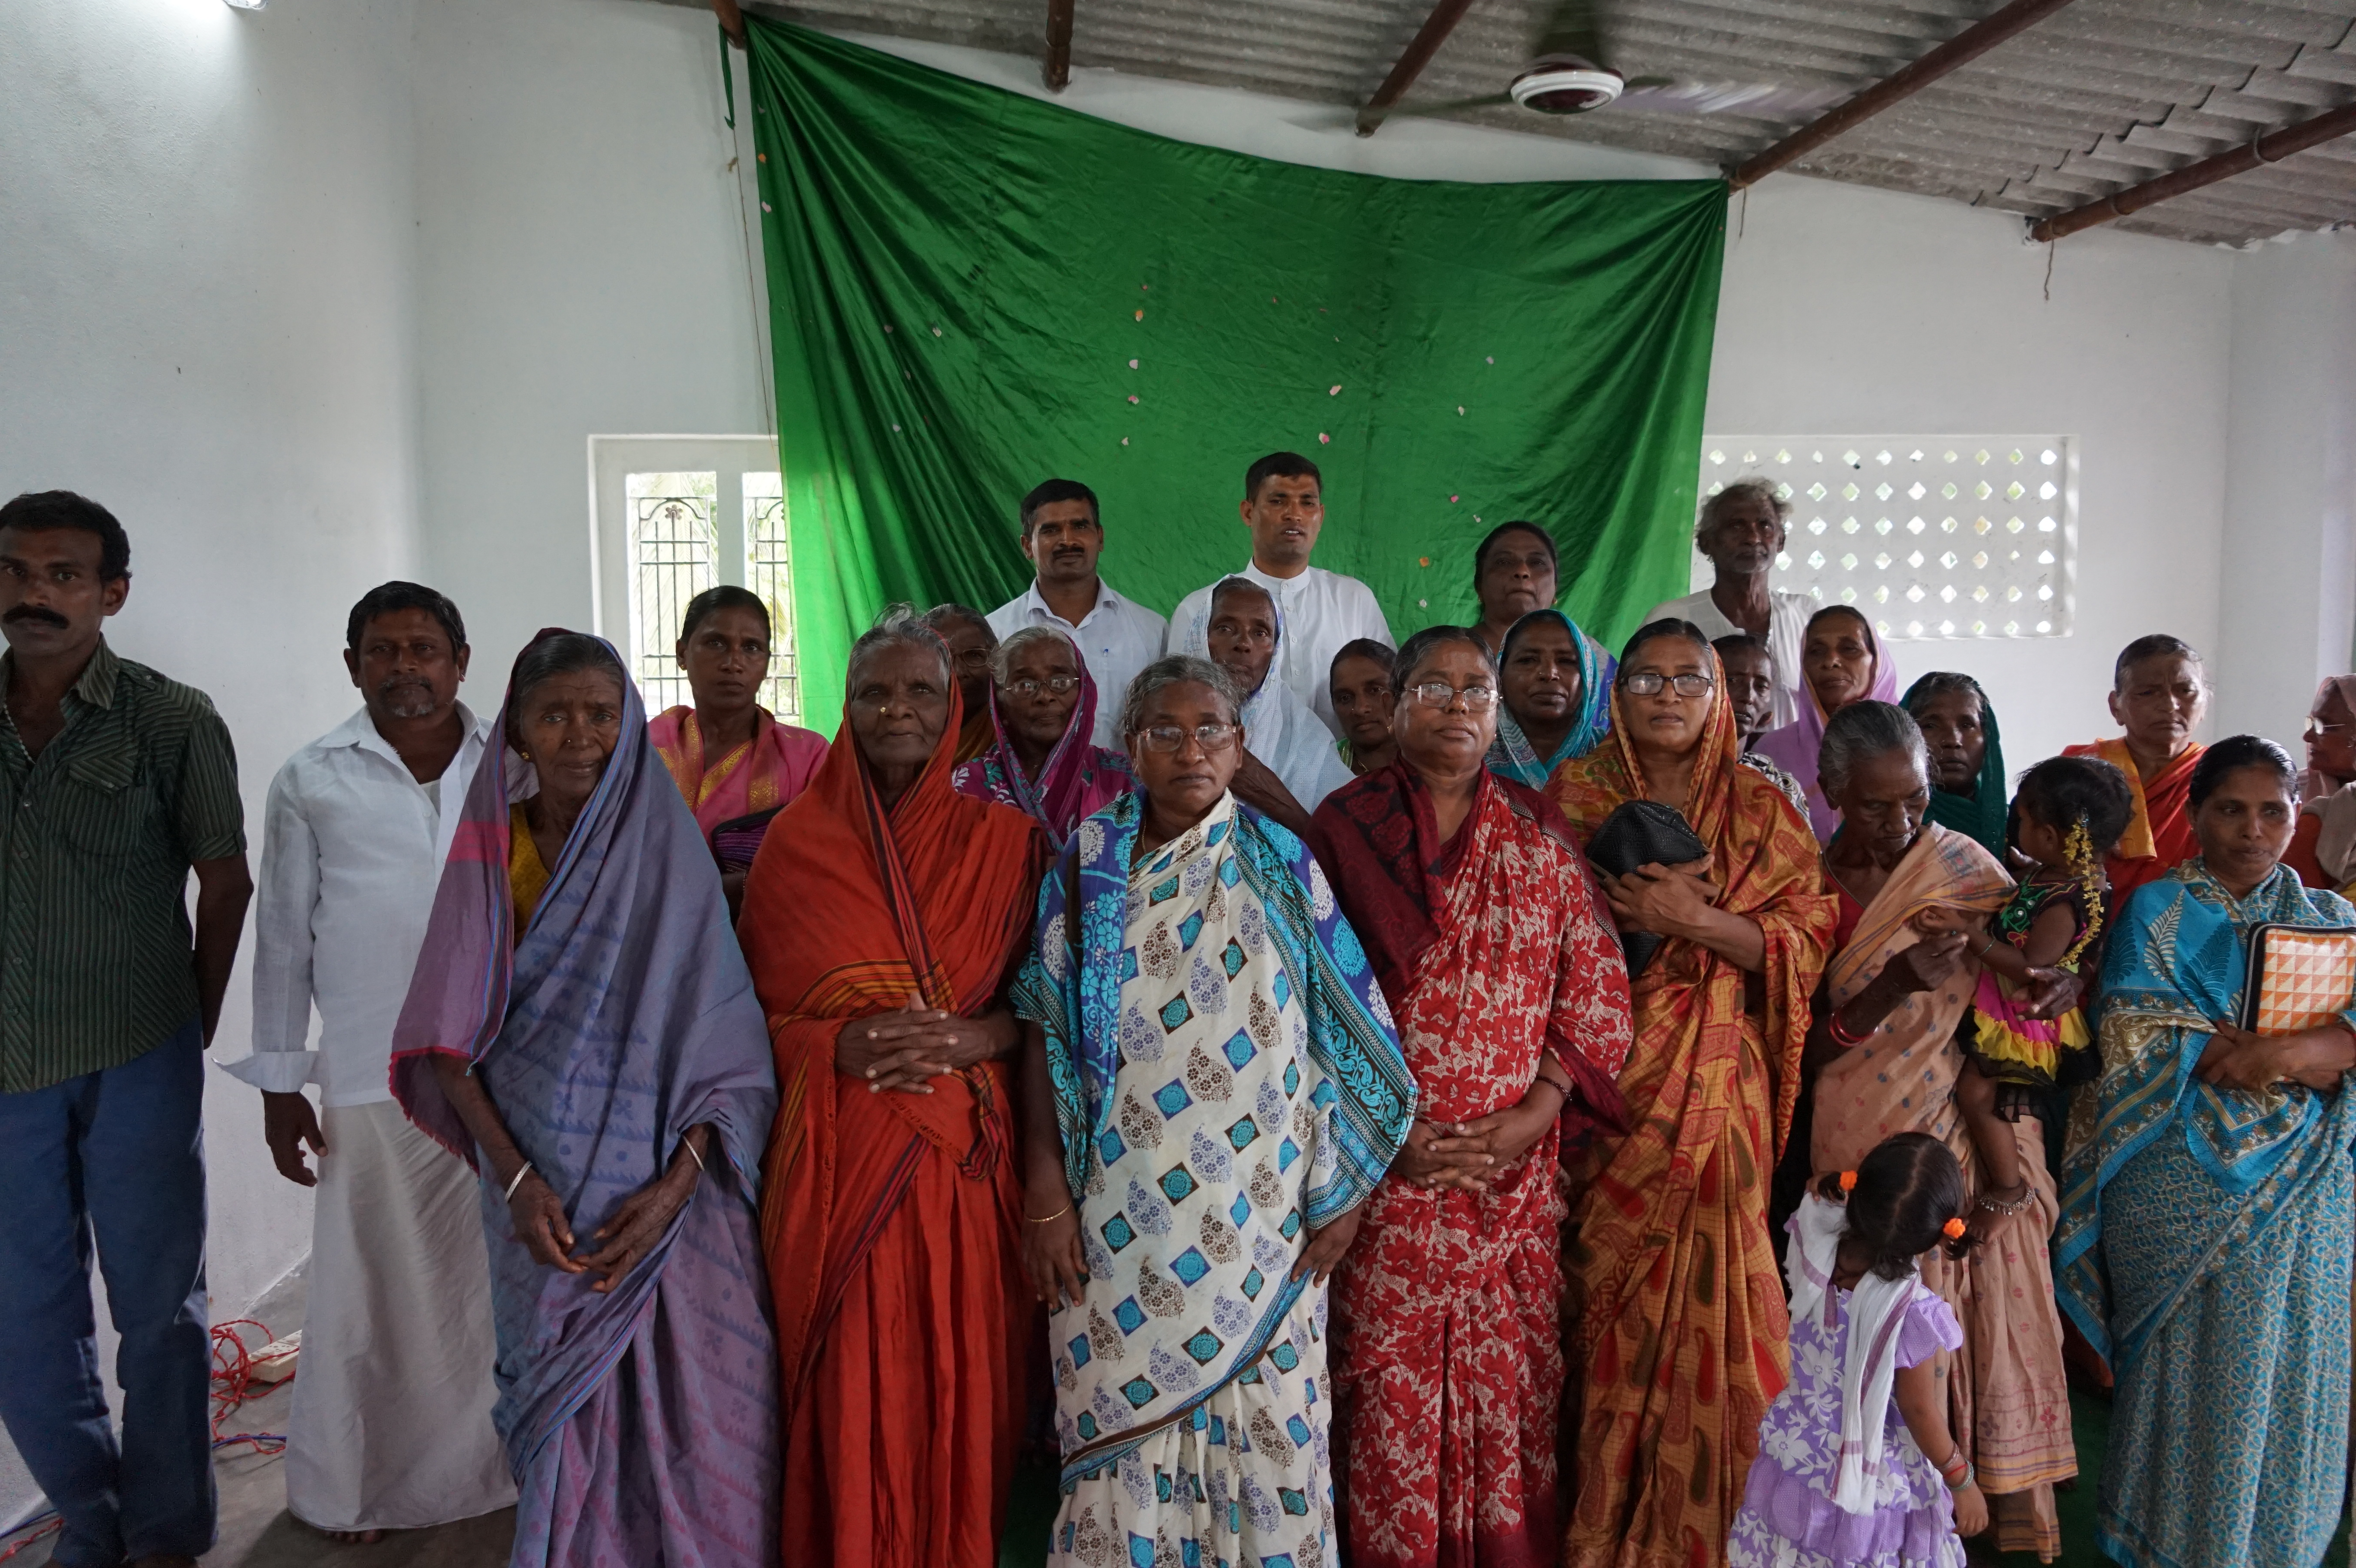 15 People Accept Jesus at First Good News Retreat Centre Meeting - S.T.Colony, Nandiwada, India